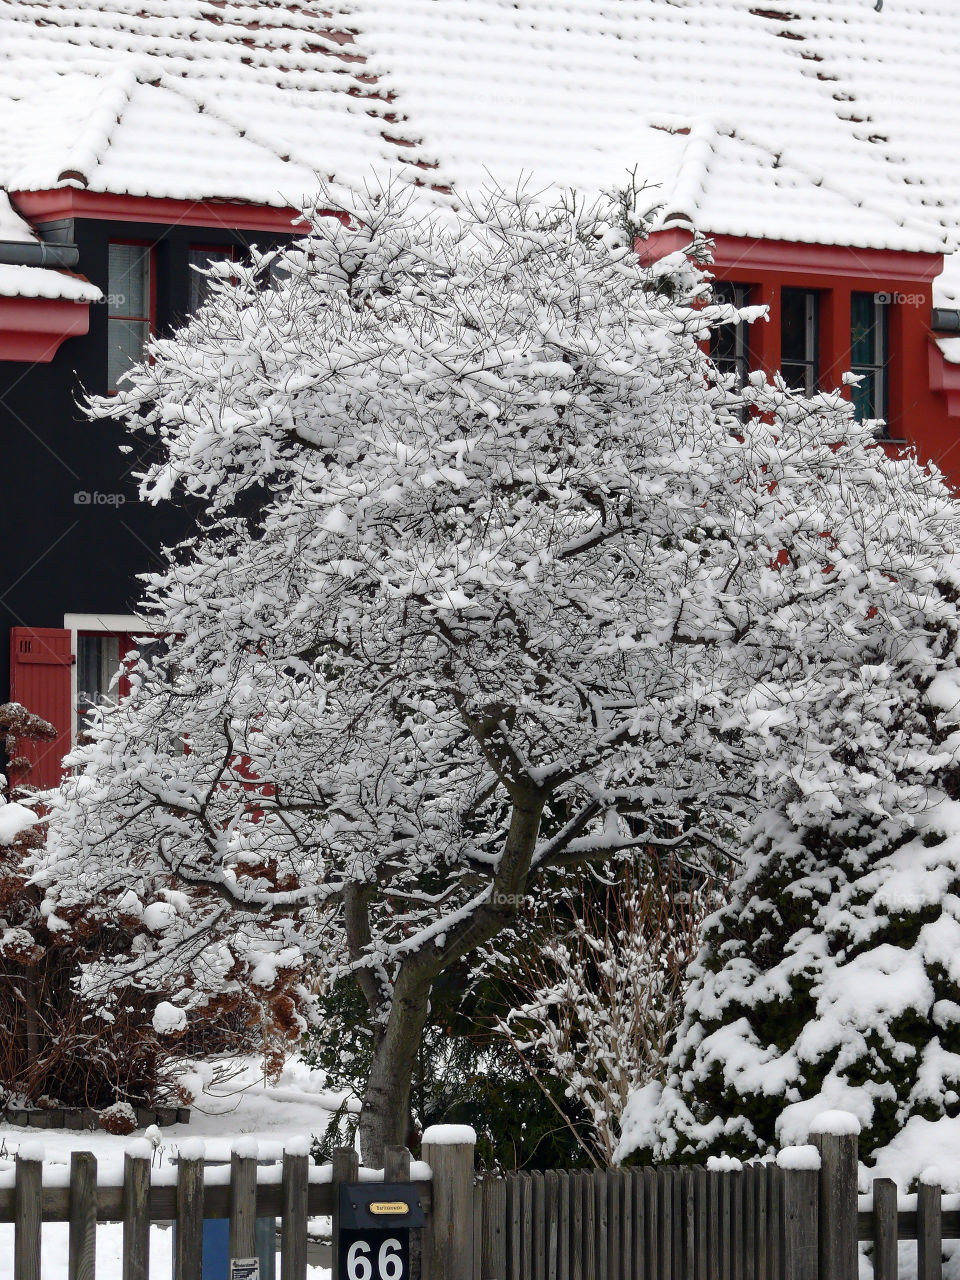 Snow on tree with houses in background in Berlin, Germany.